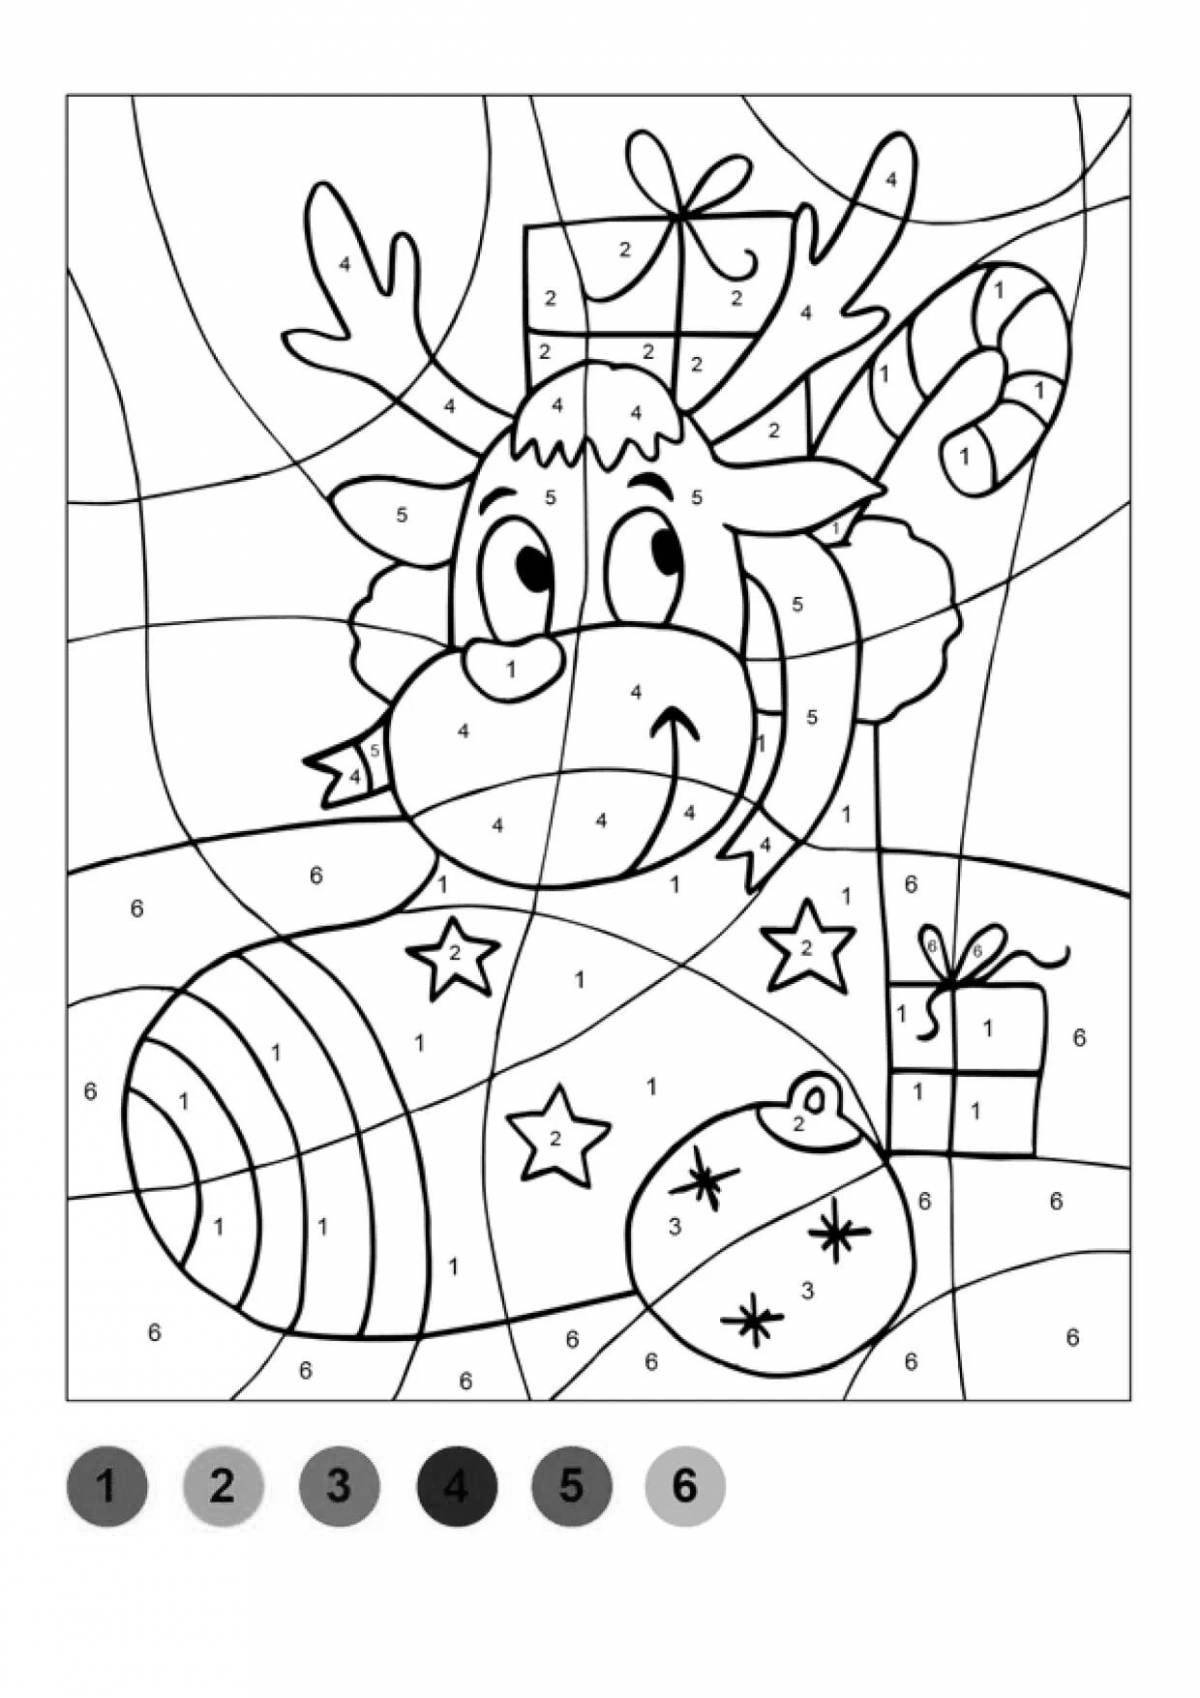 Joyful winter by numbers coloring page